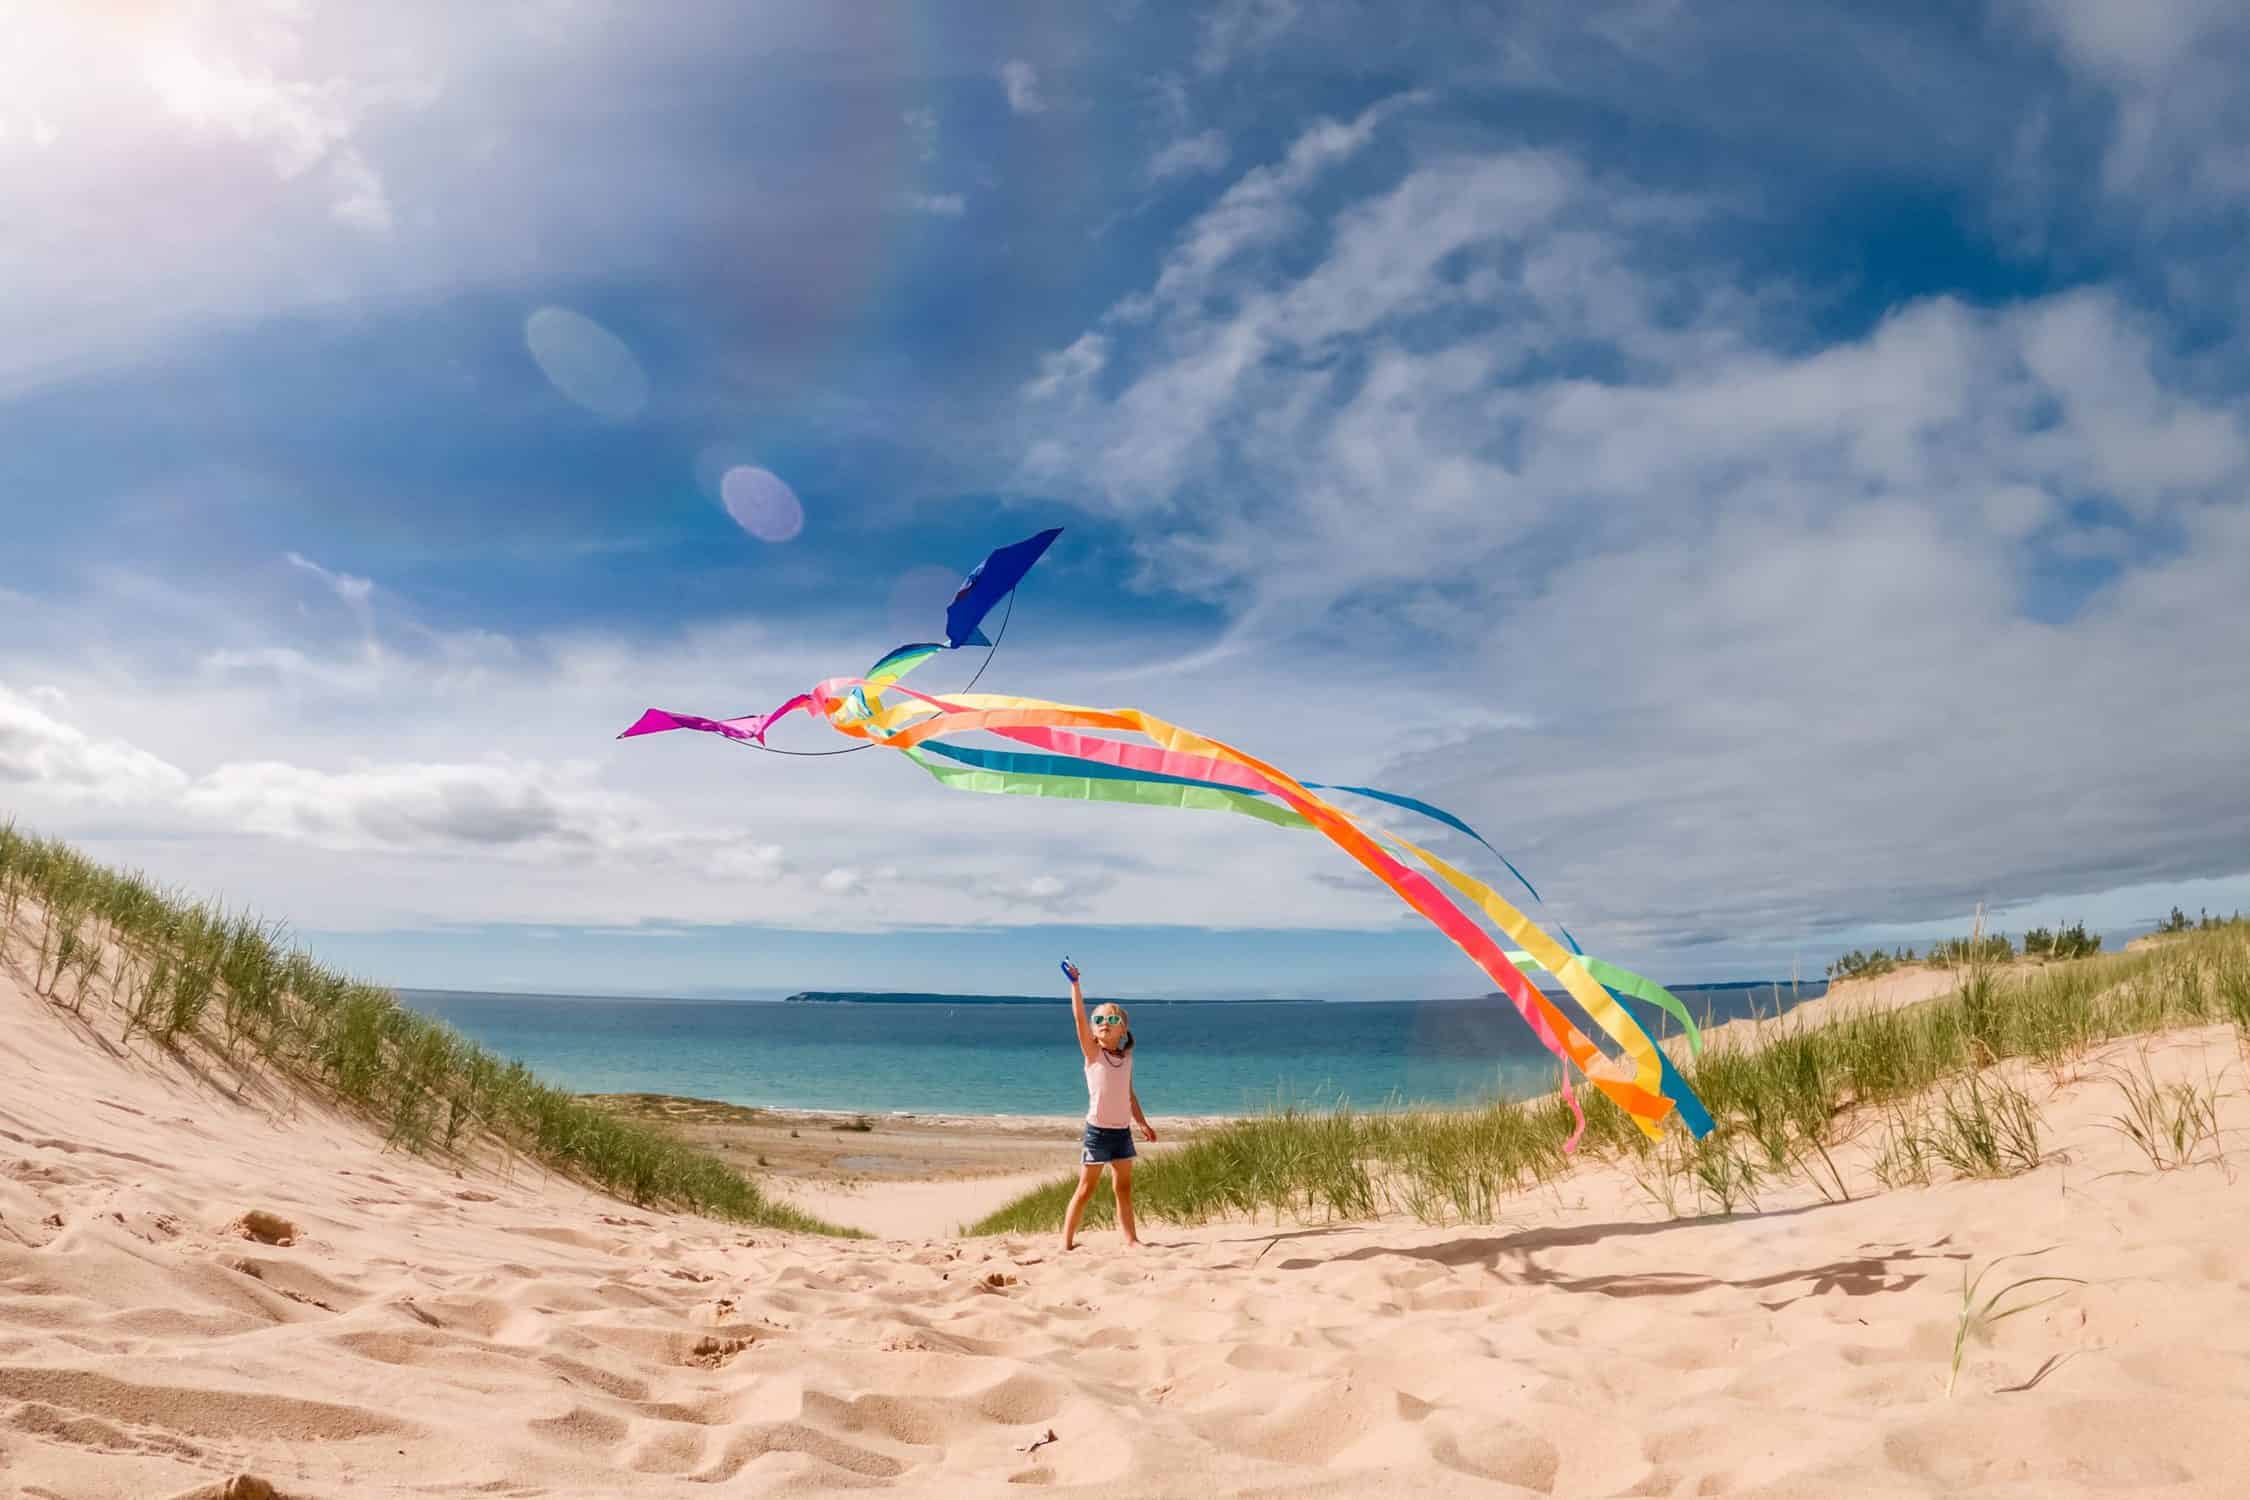 Kite Flying with Kids : How to Choose, Launch, Fly & Land a Kite